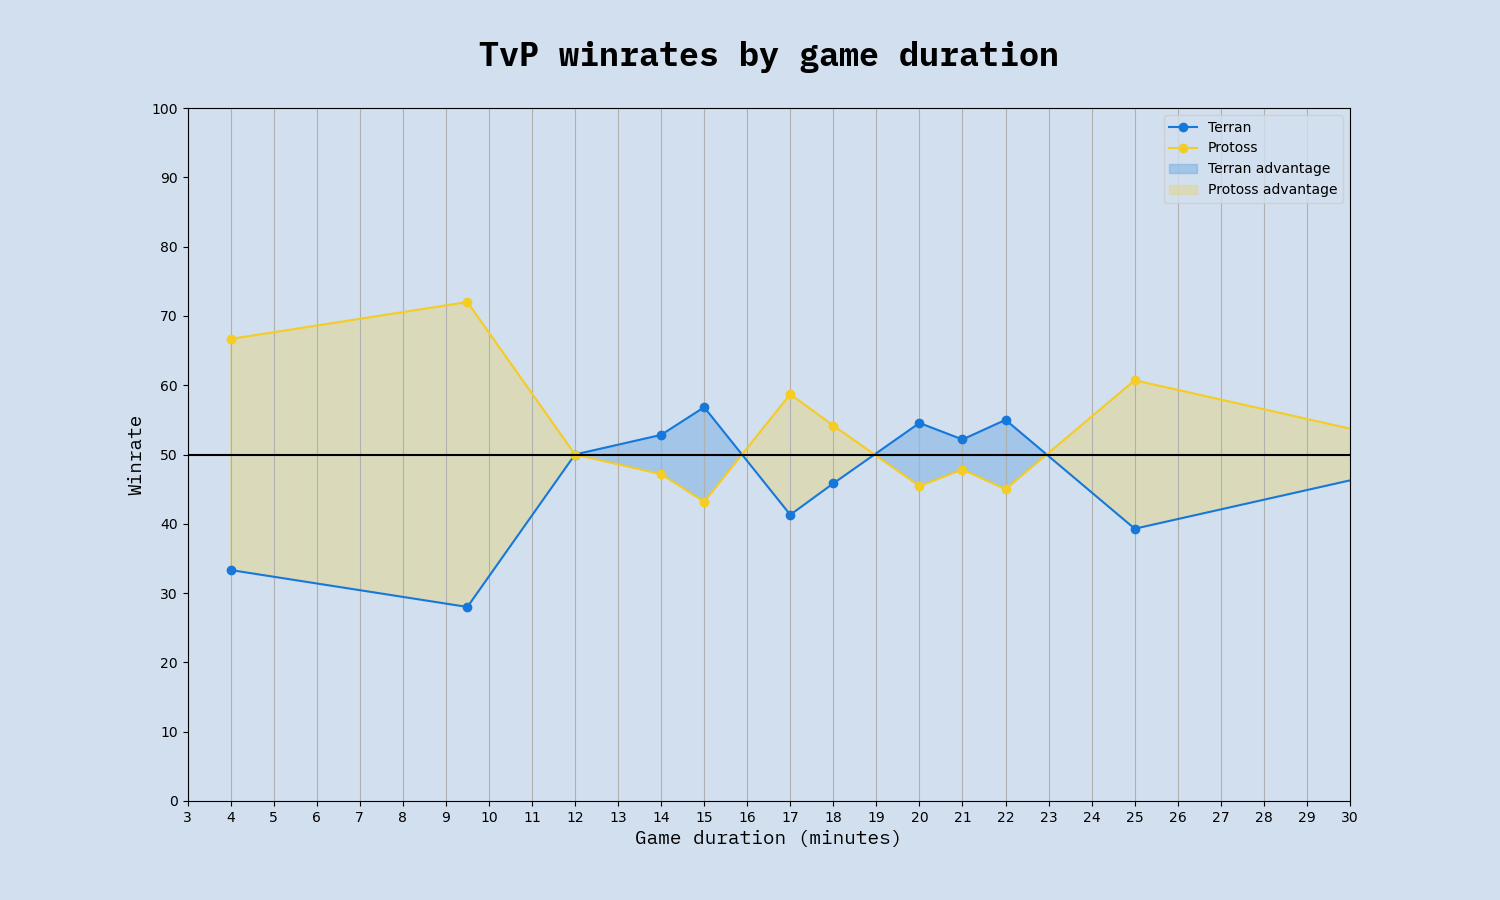 TvP winrate by game duration